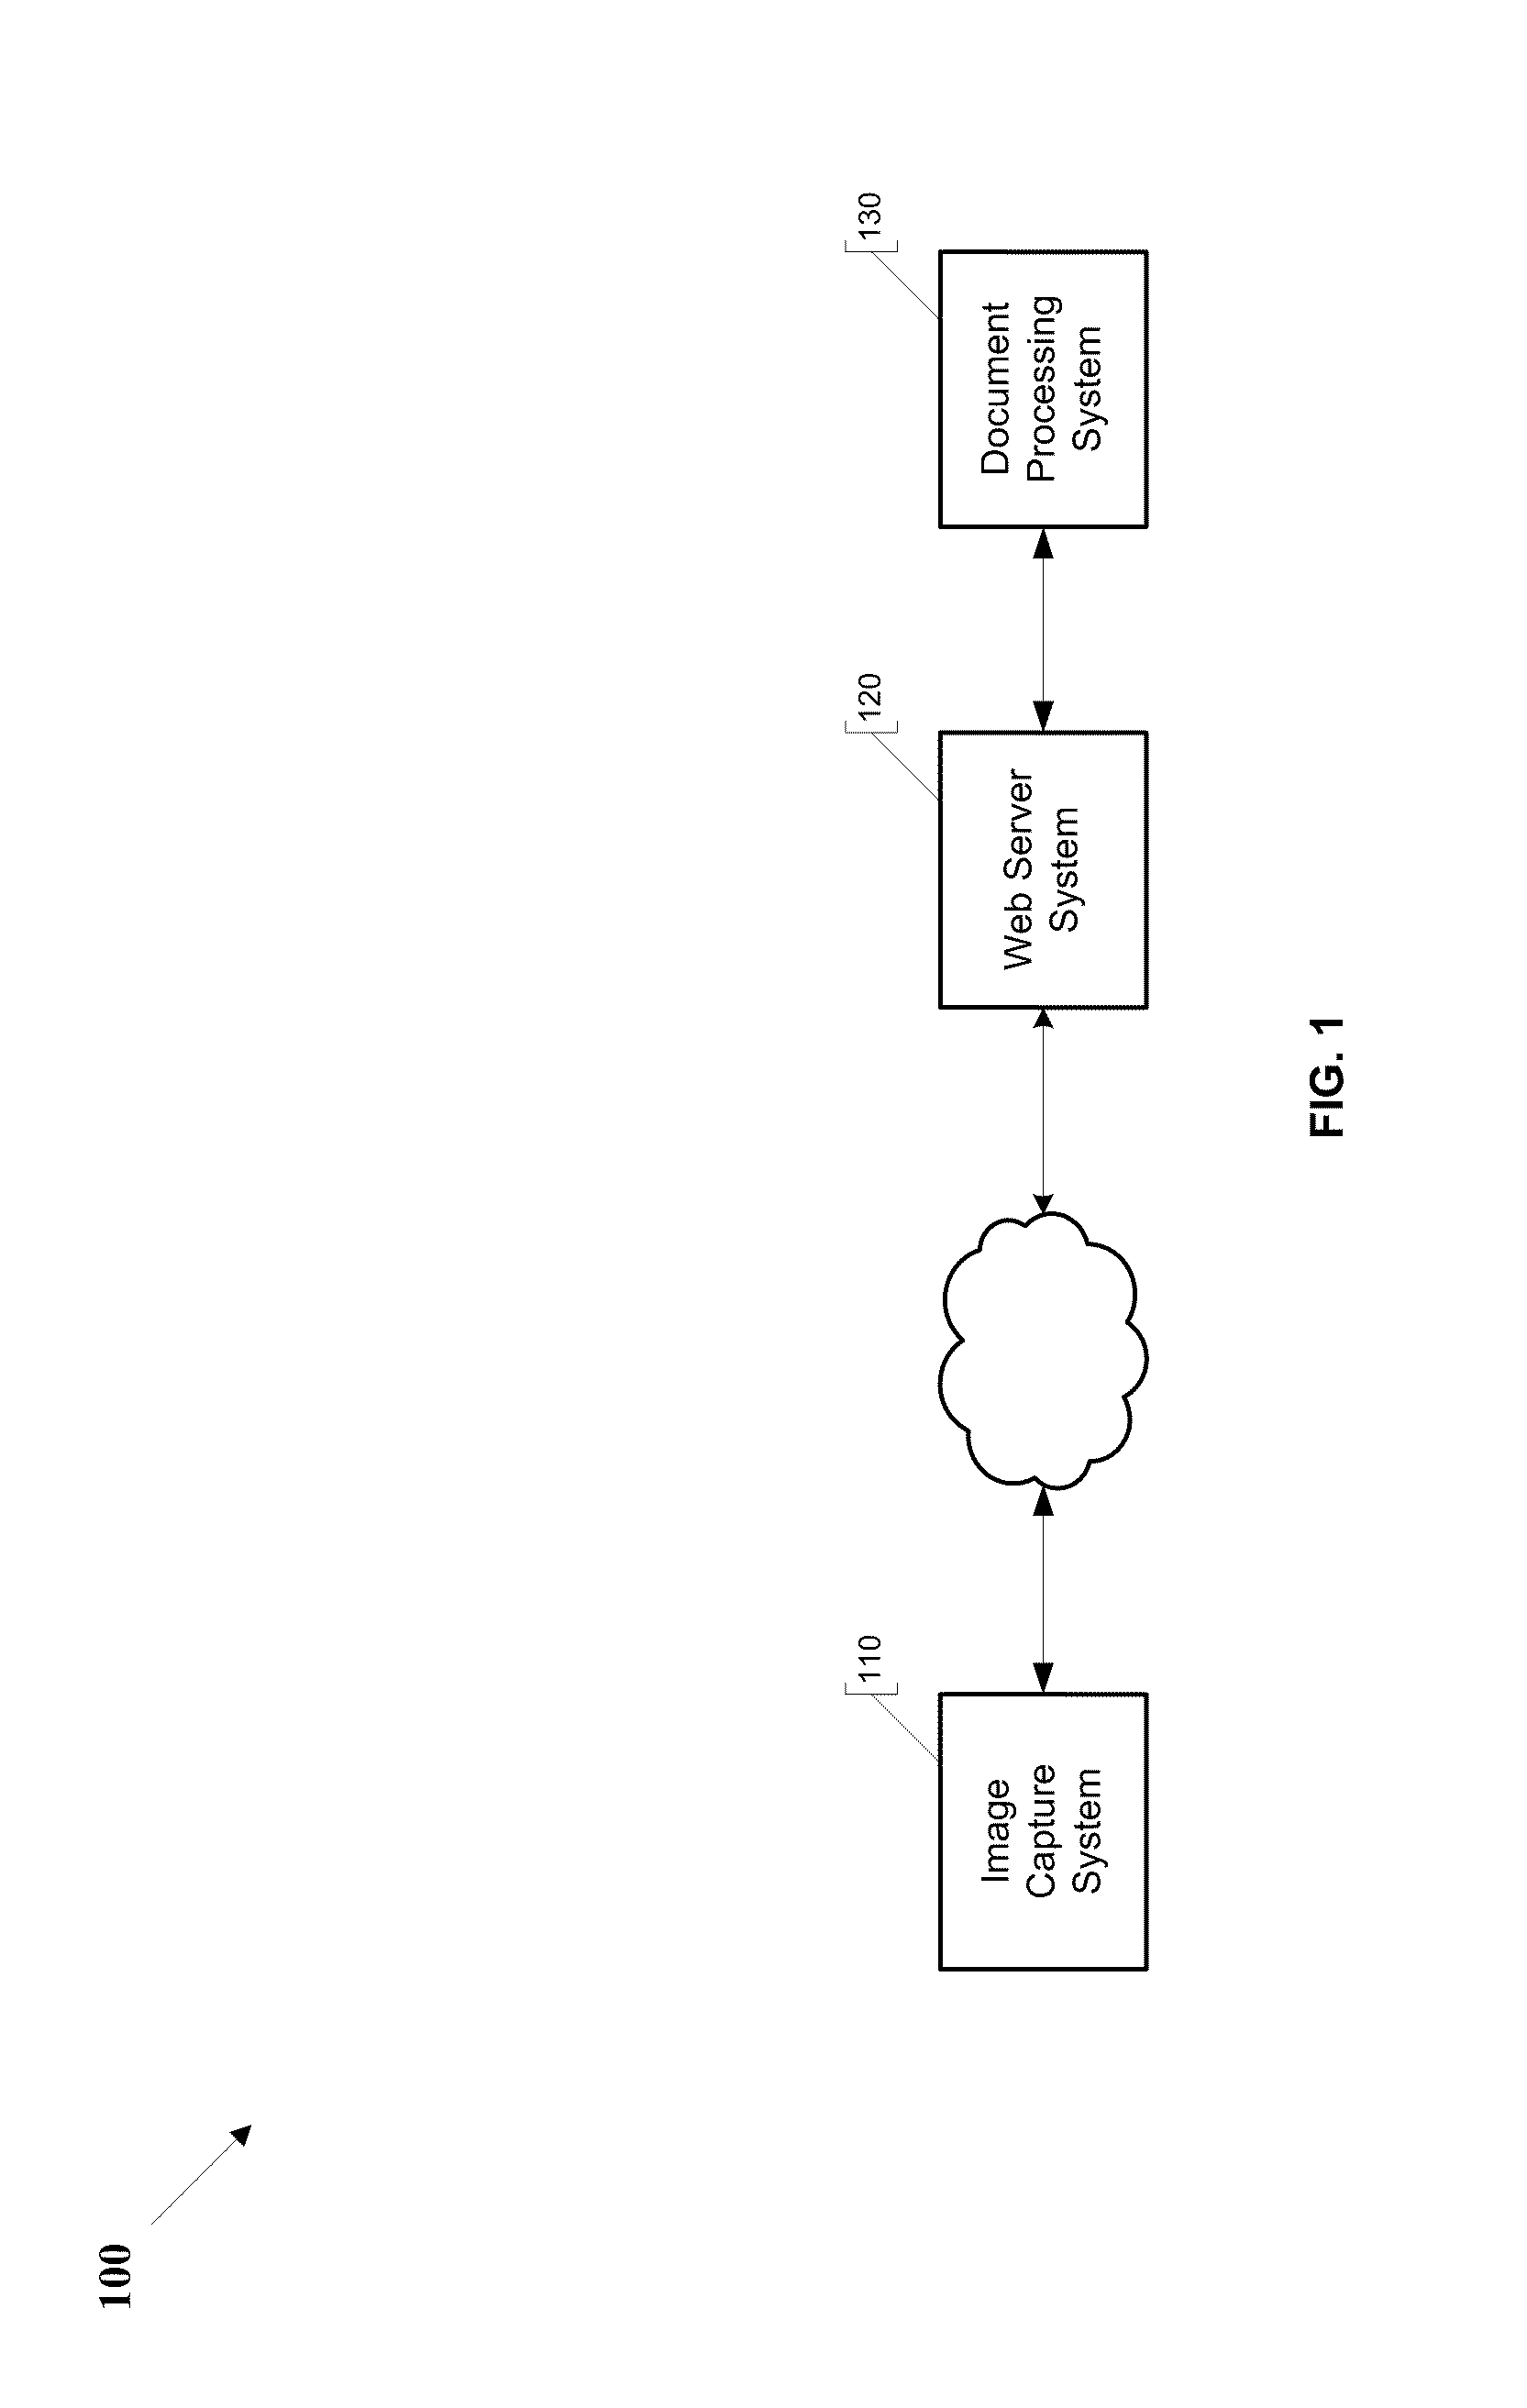 Systems and methods for automatically processing electronic documents using multiple image transformation algorithms